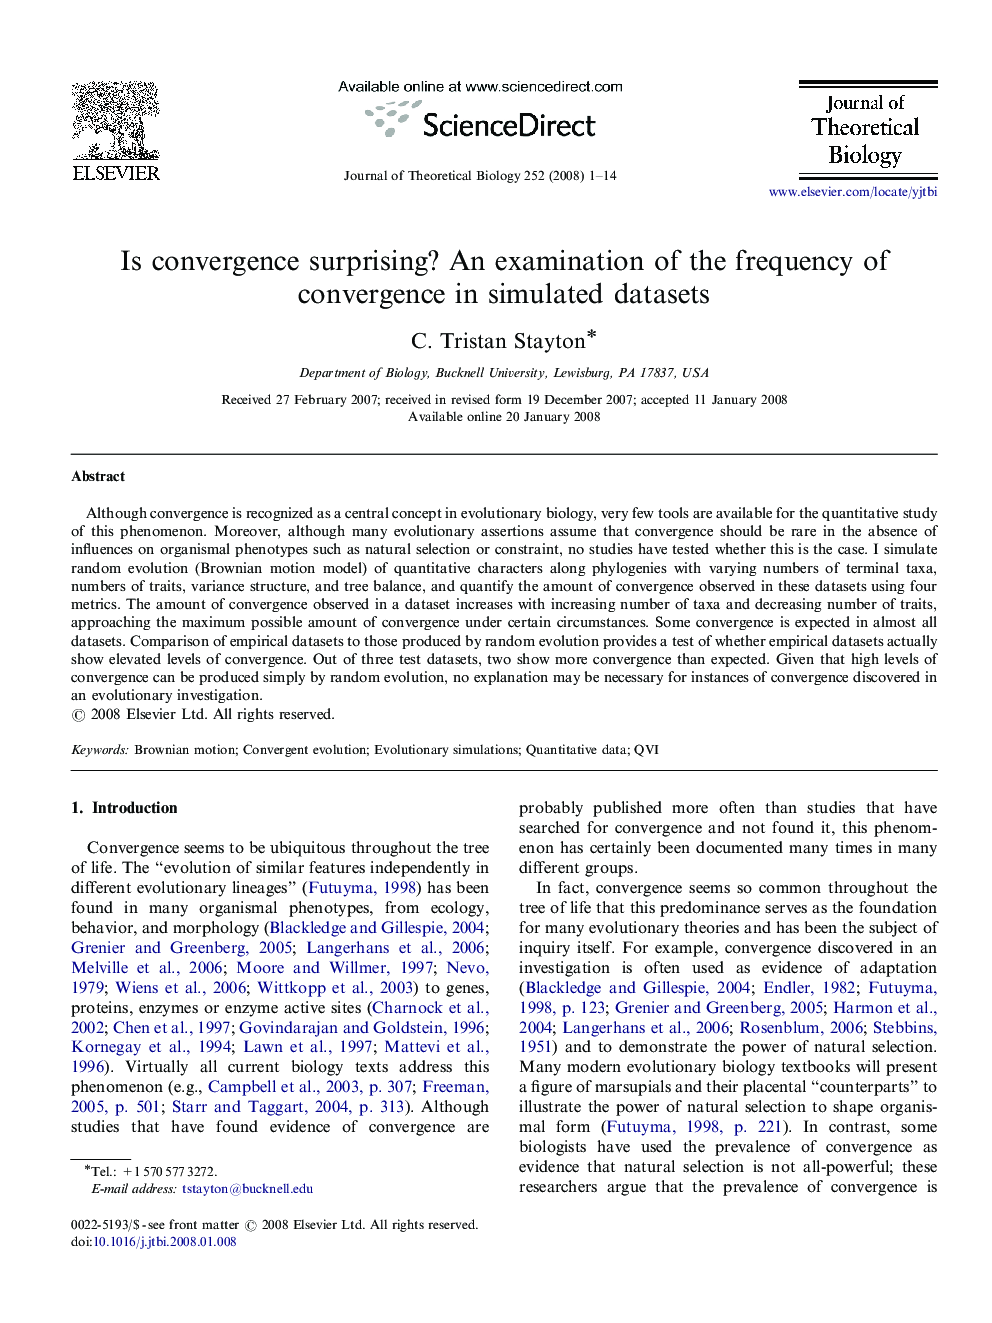 Is convergence surprising? An examination of the frequency of convergence in simulated datasets